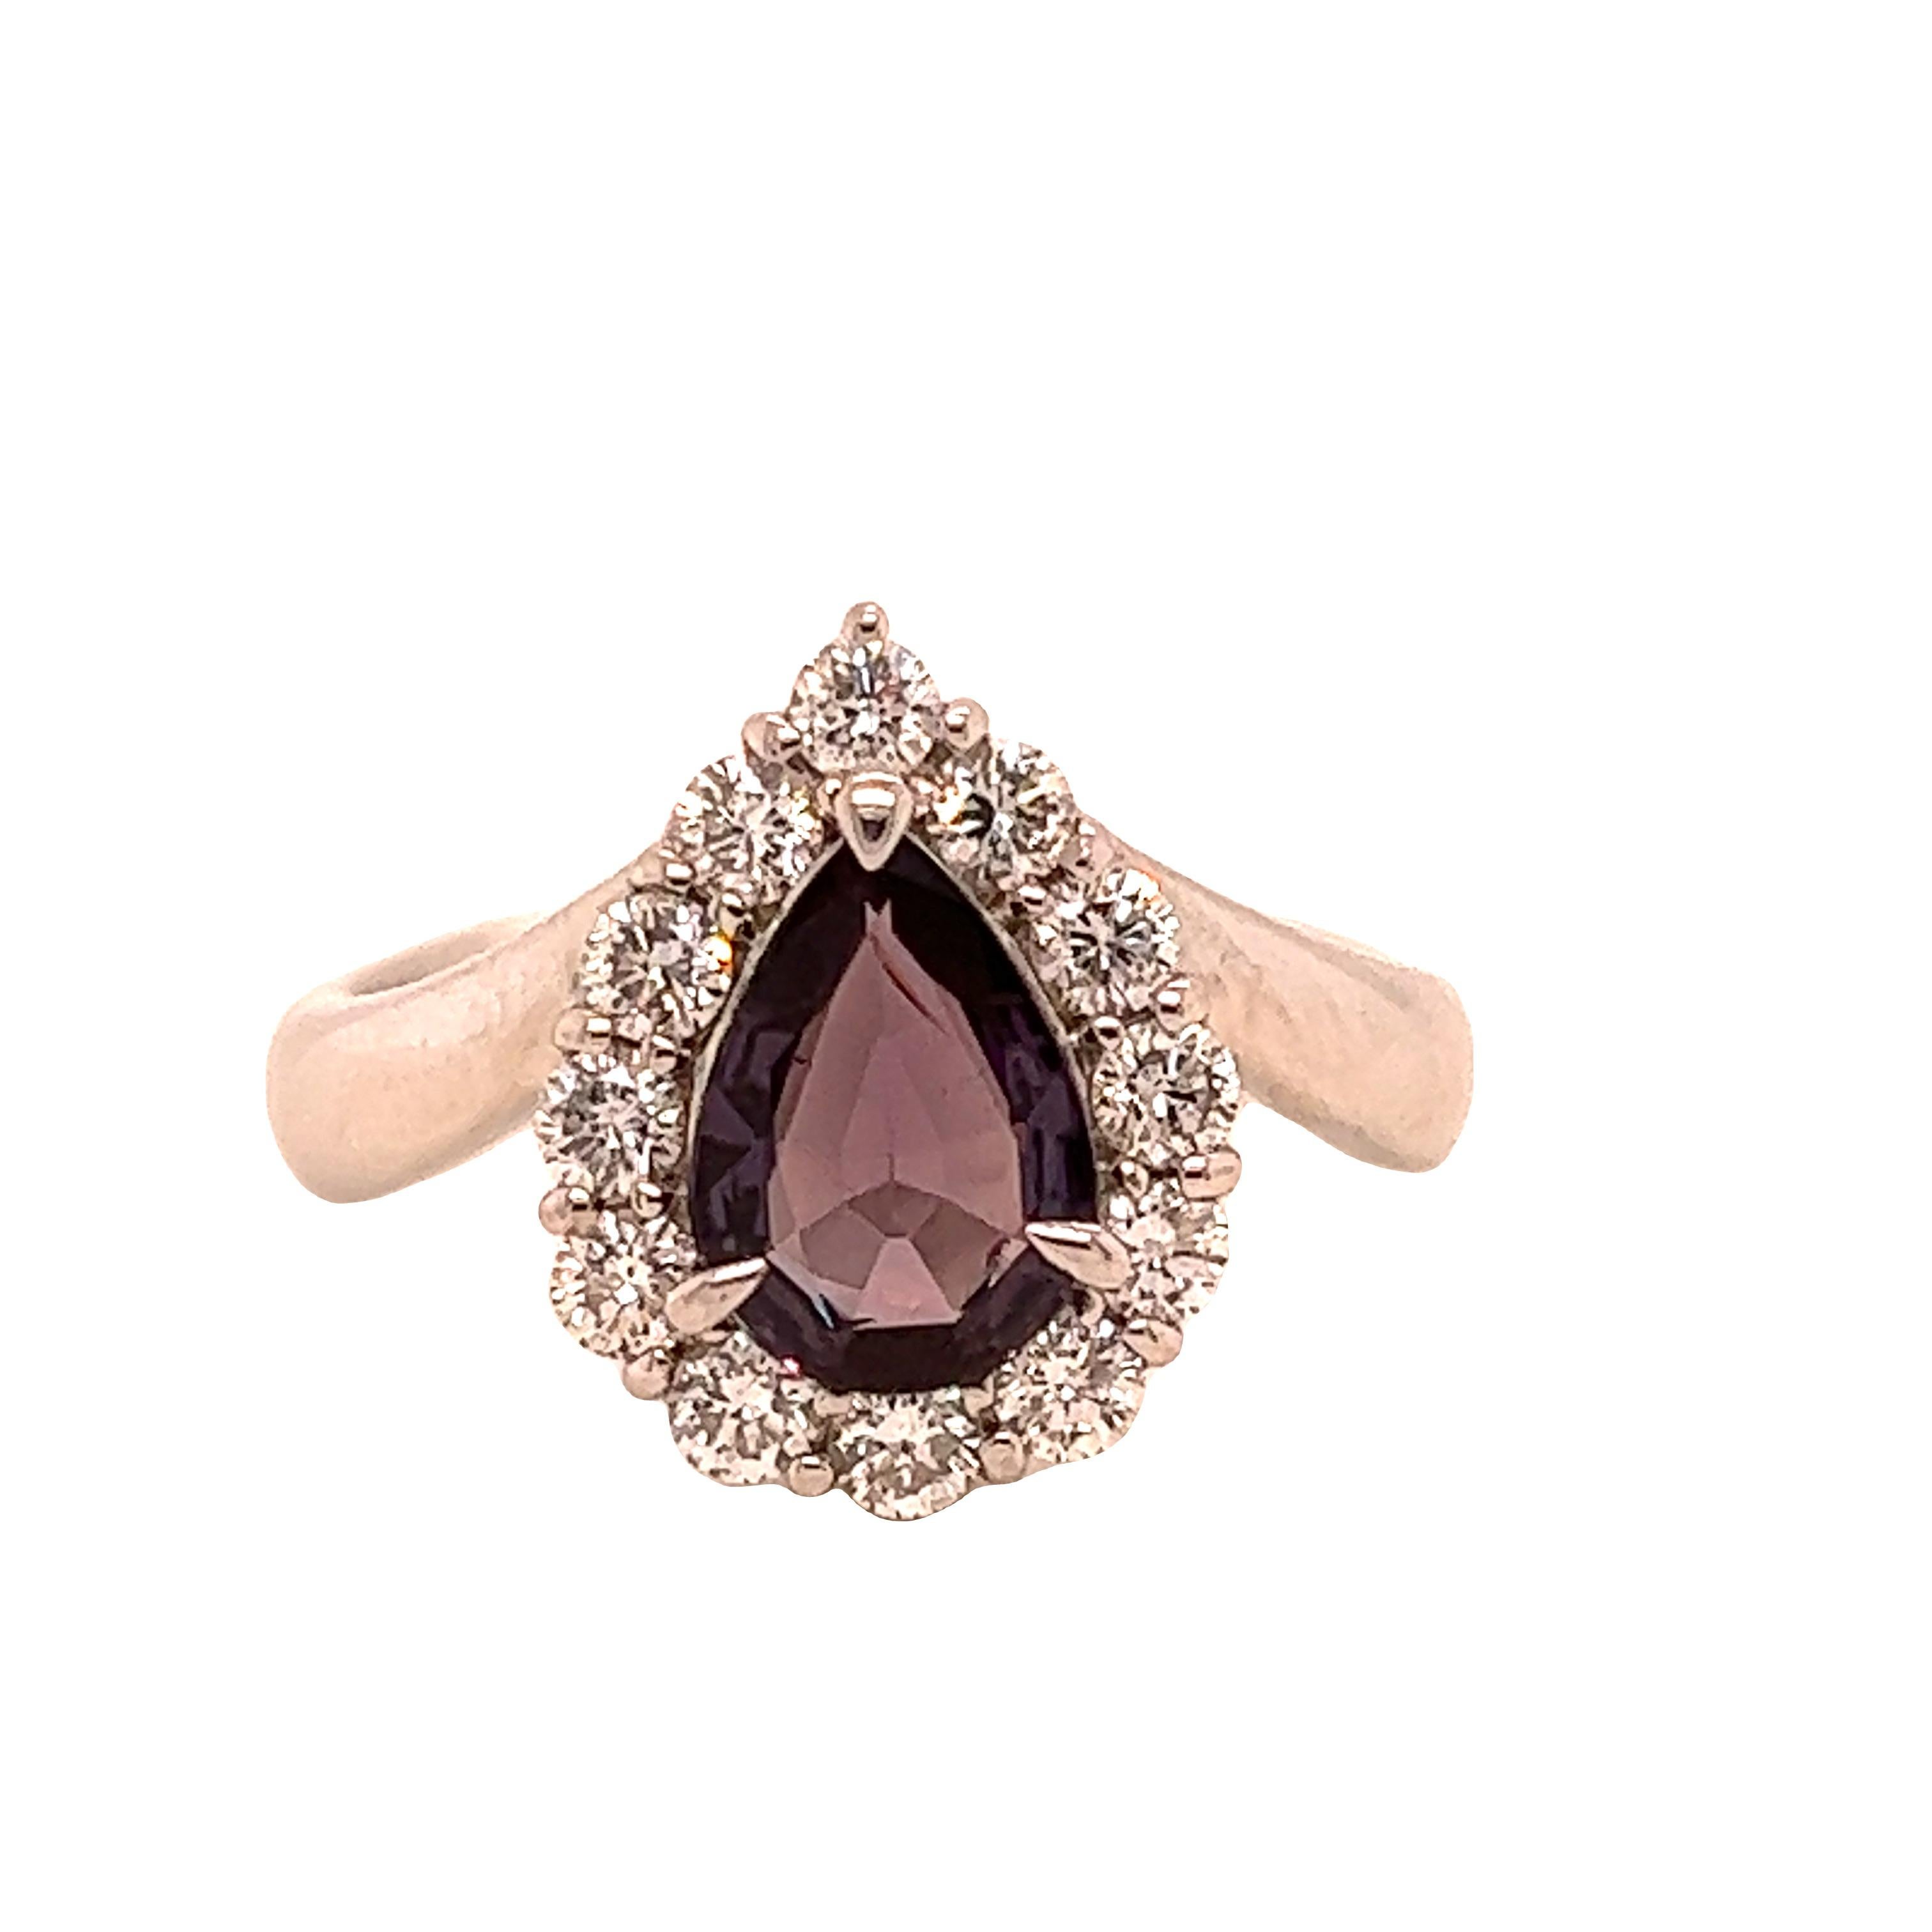 This is a gorgeous natural AAA quality pear Alexandrite surrounded by dainty diamonds that is set in a vintage platinum setting. This ring features a natural 1.08 carat pear alexandrite that is certified by the Gemological Institute of America (GIA)